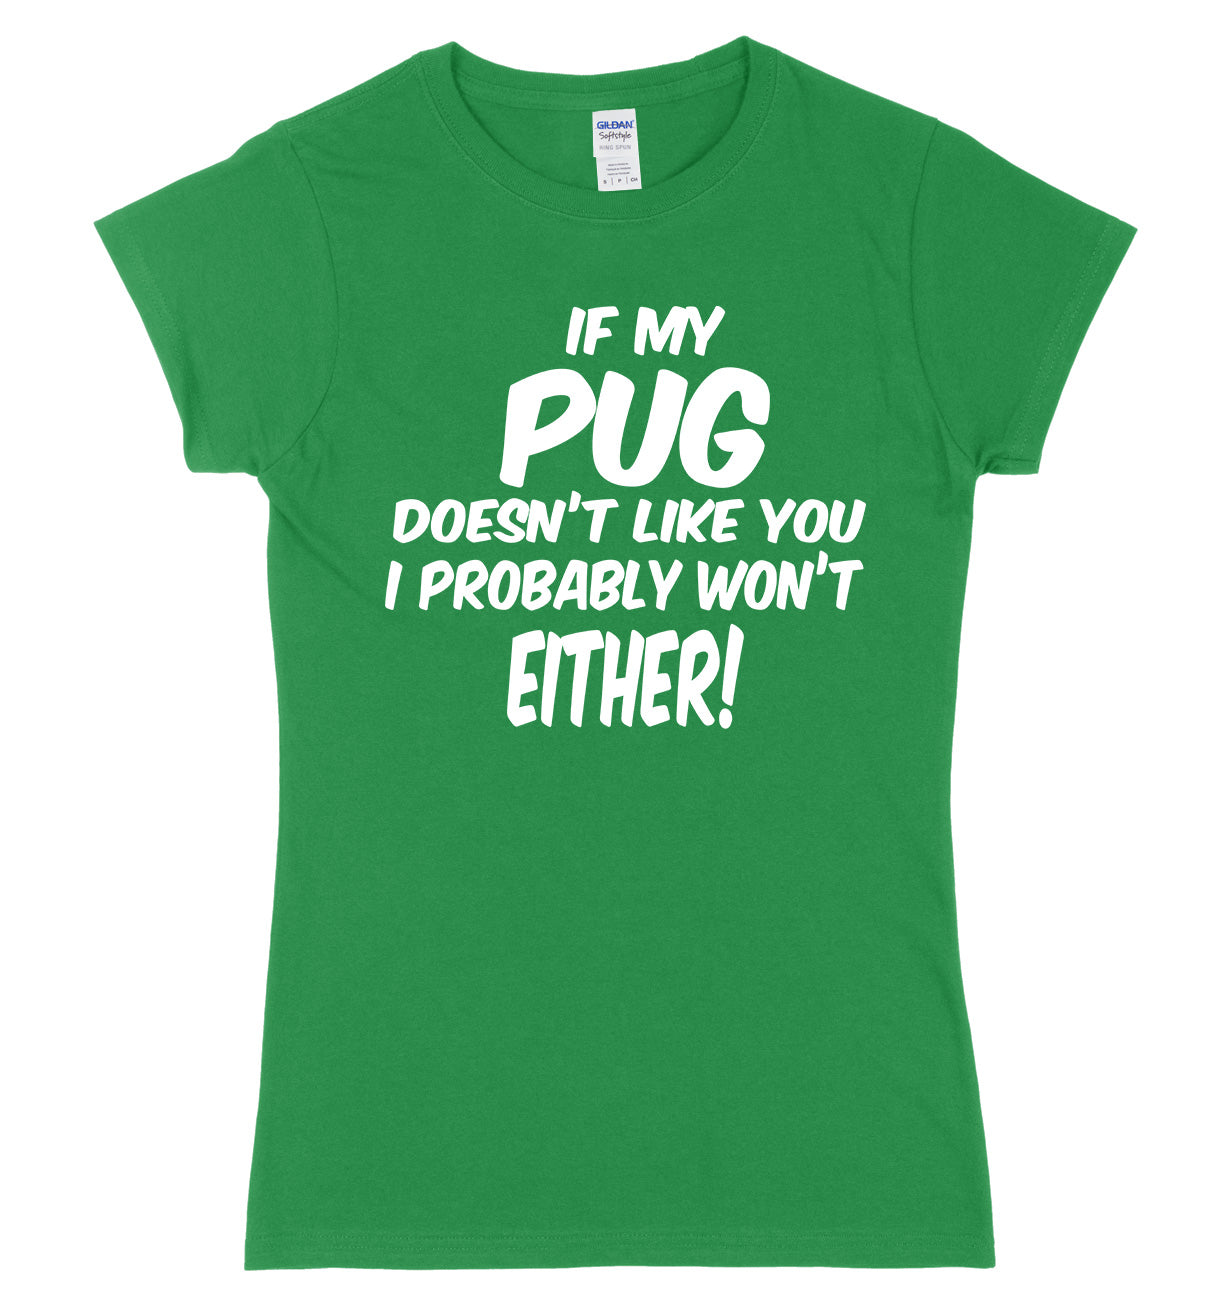 IF MY PUG DOESN'T LIKE YOU I PROBABLY WON'T EITHER FUNNY WOMENS LADIES SLIM FIT  T-SHIRT